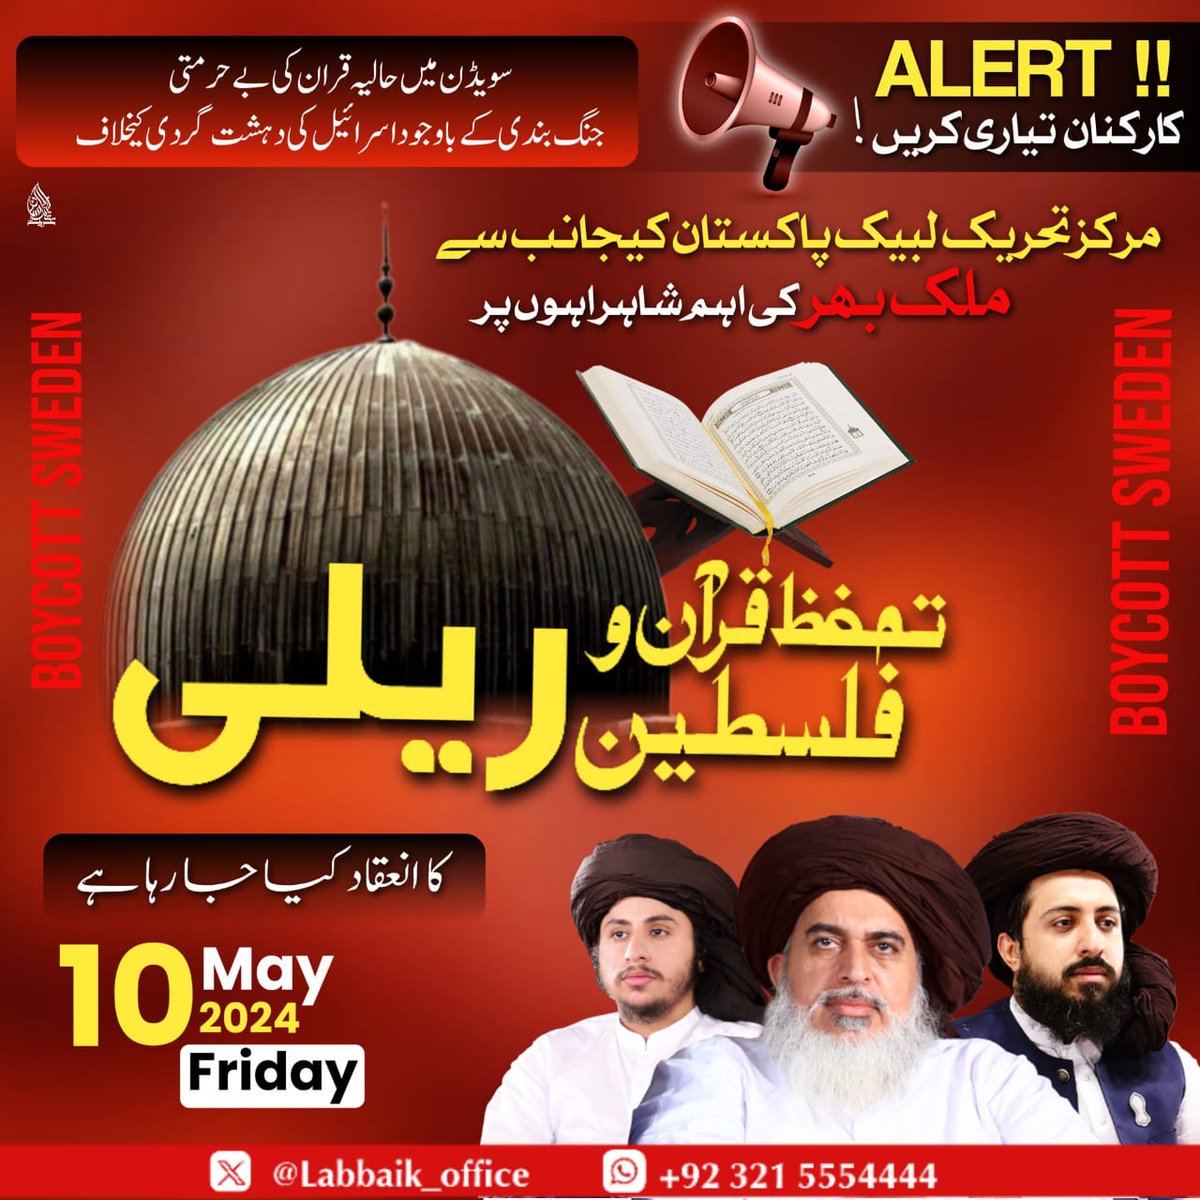 Alert!! Be prepared Friday, May 10th 2024. On major highways across the country!! 'Against the blasphemers of the Quran and Israeli terrorists!' #GrandMediaCell